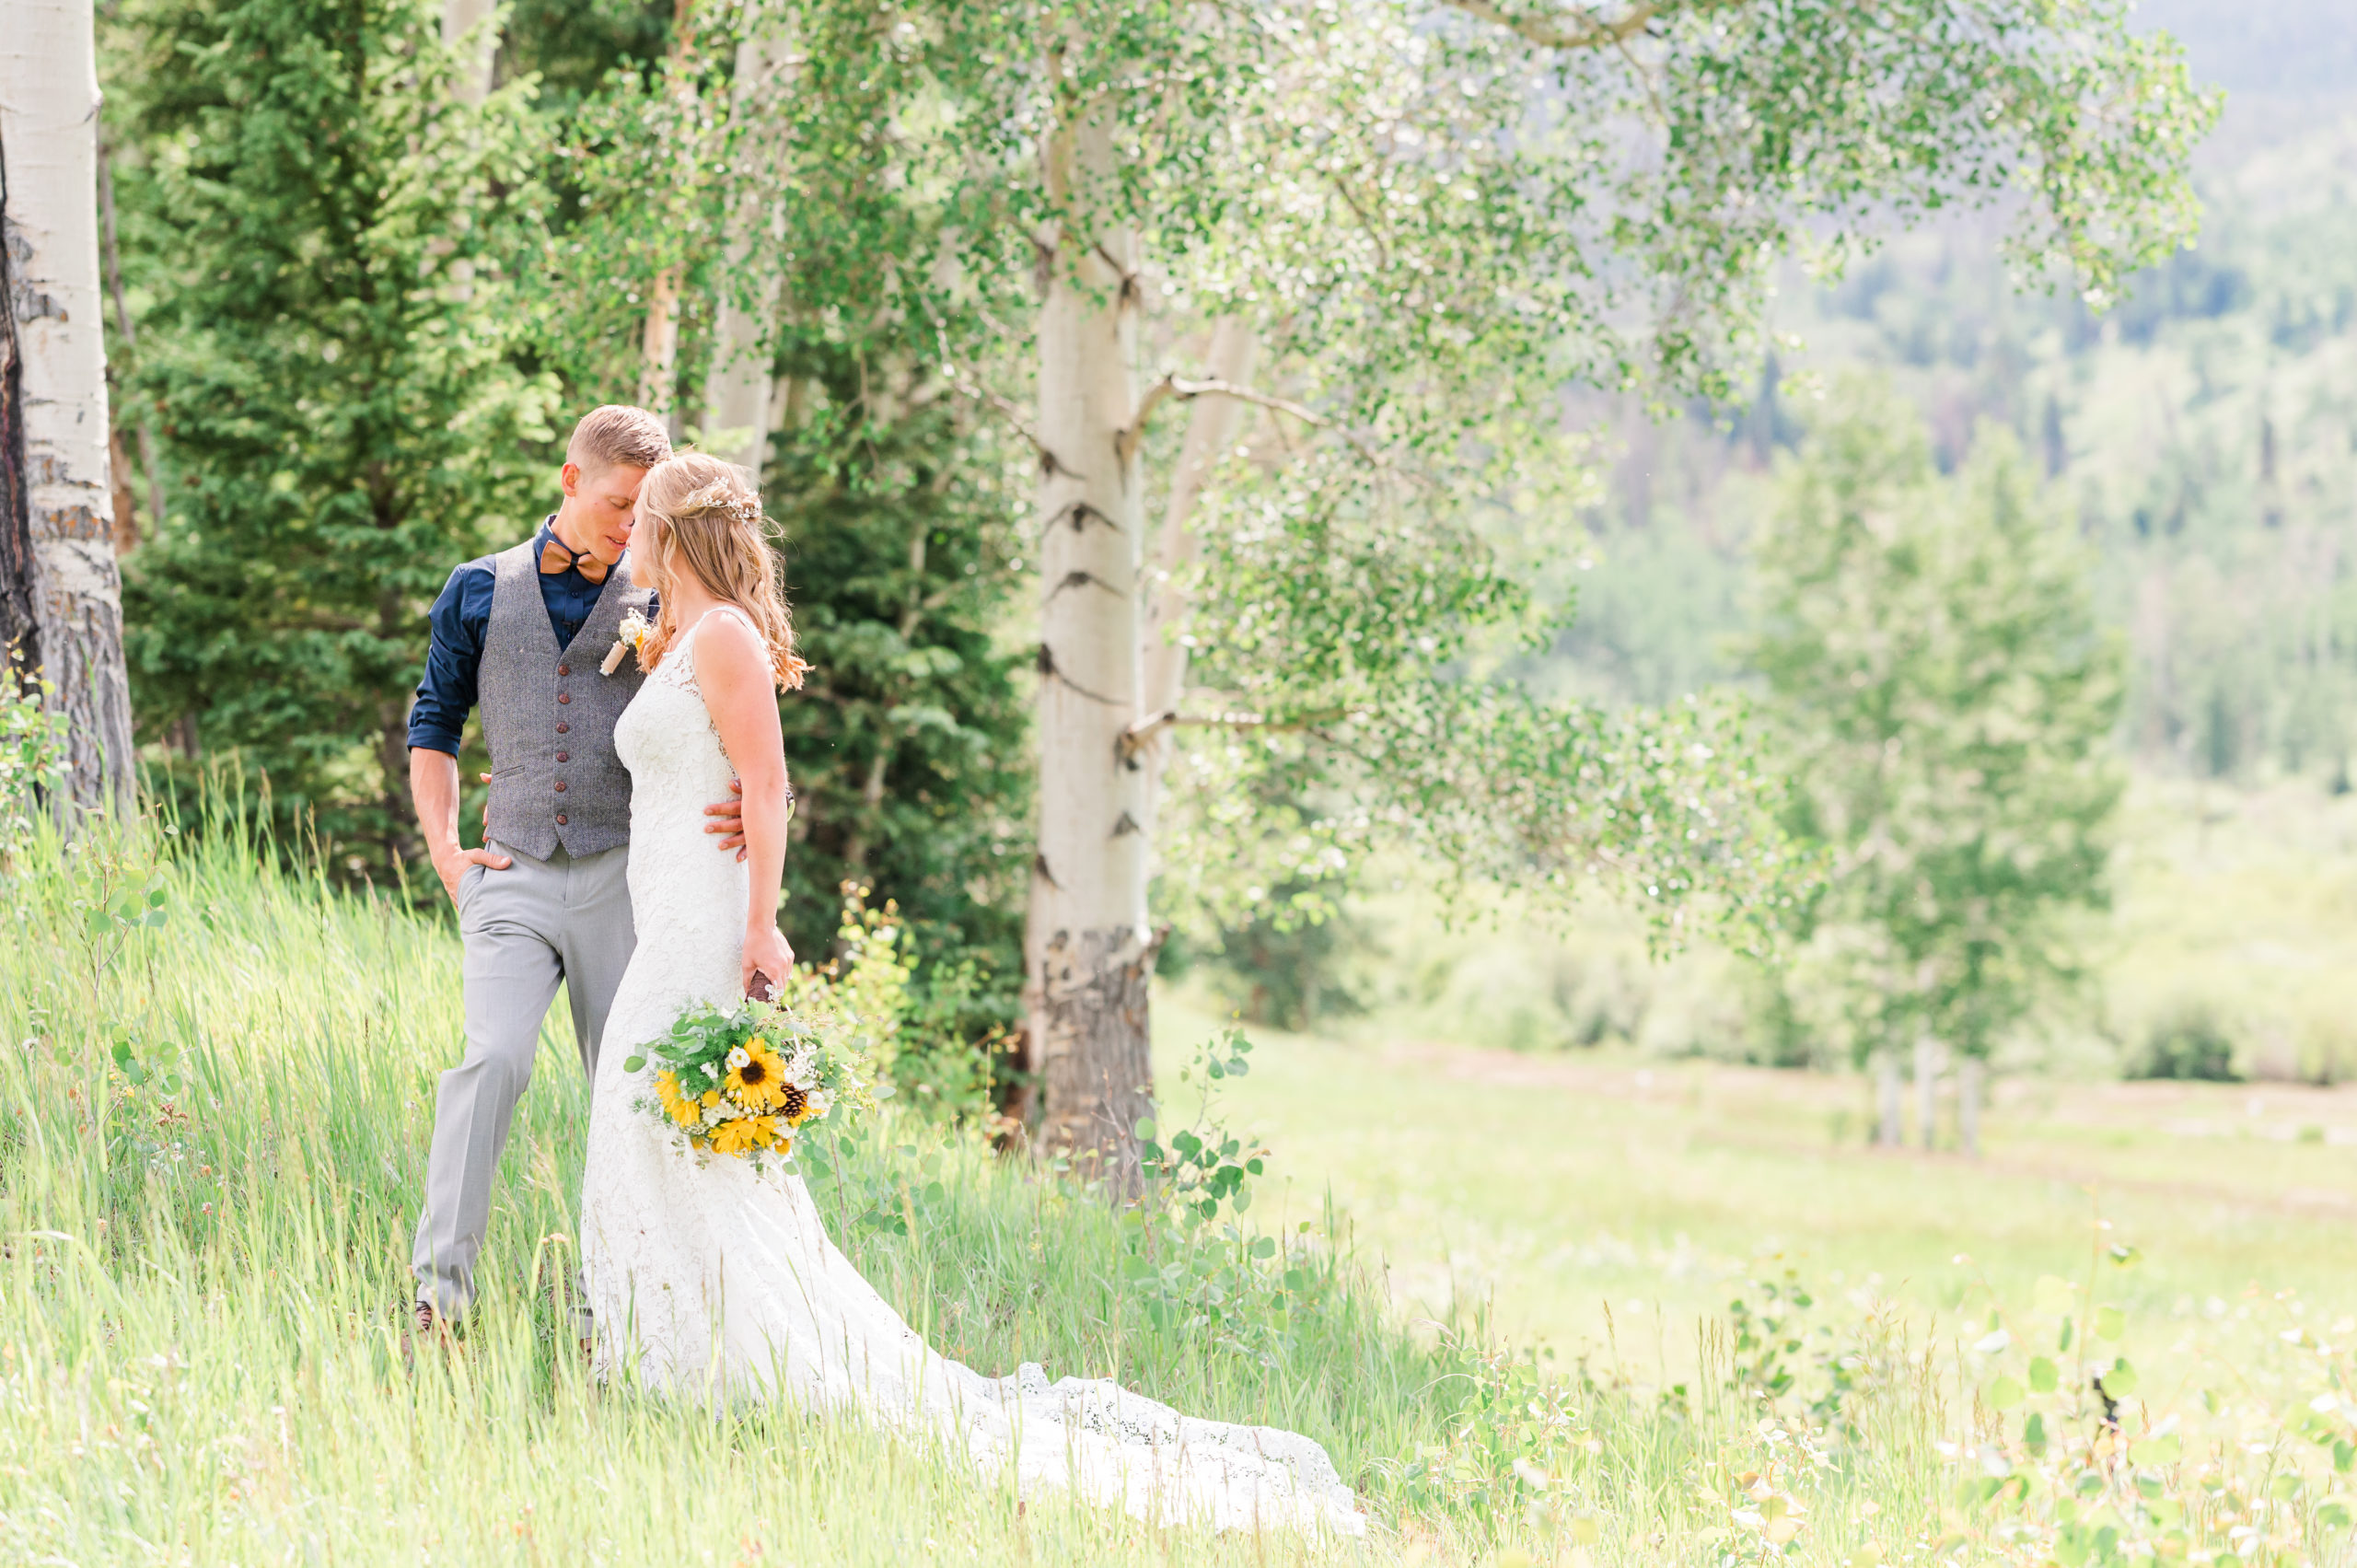 Rustic Summer Wedding in Granby | Britni Girard Photography | Colorado Destination Wedding Photo and Video Team | Surrounded by beautiful Mountain views on a private estate | Dress - The from The Alter Bridal in Lakewood | Florals by The Holly Berry | Hair and Makeup by Callie Graham | Bridesmaid Dresses from Azazie